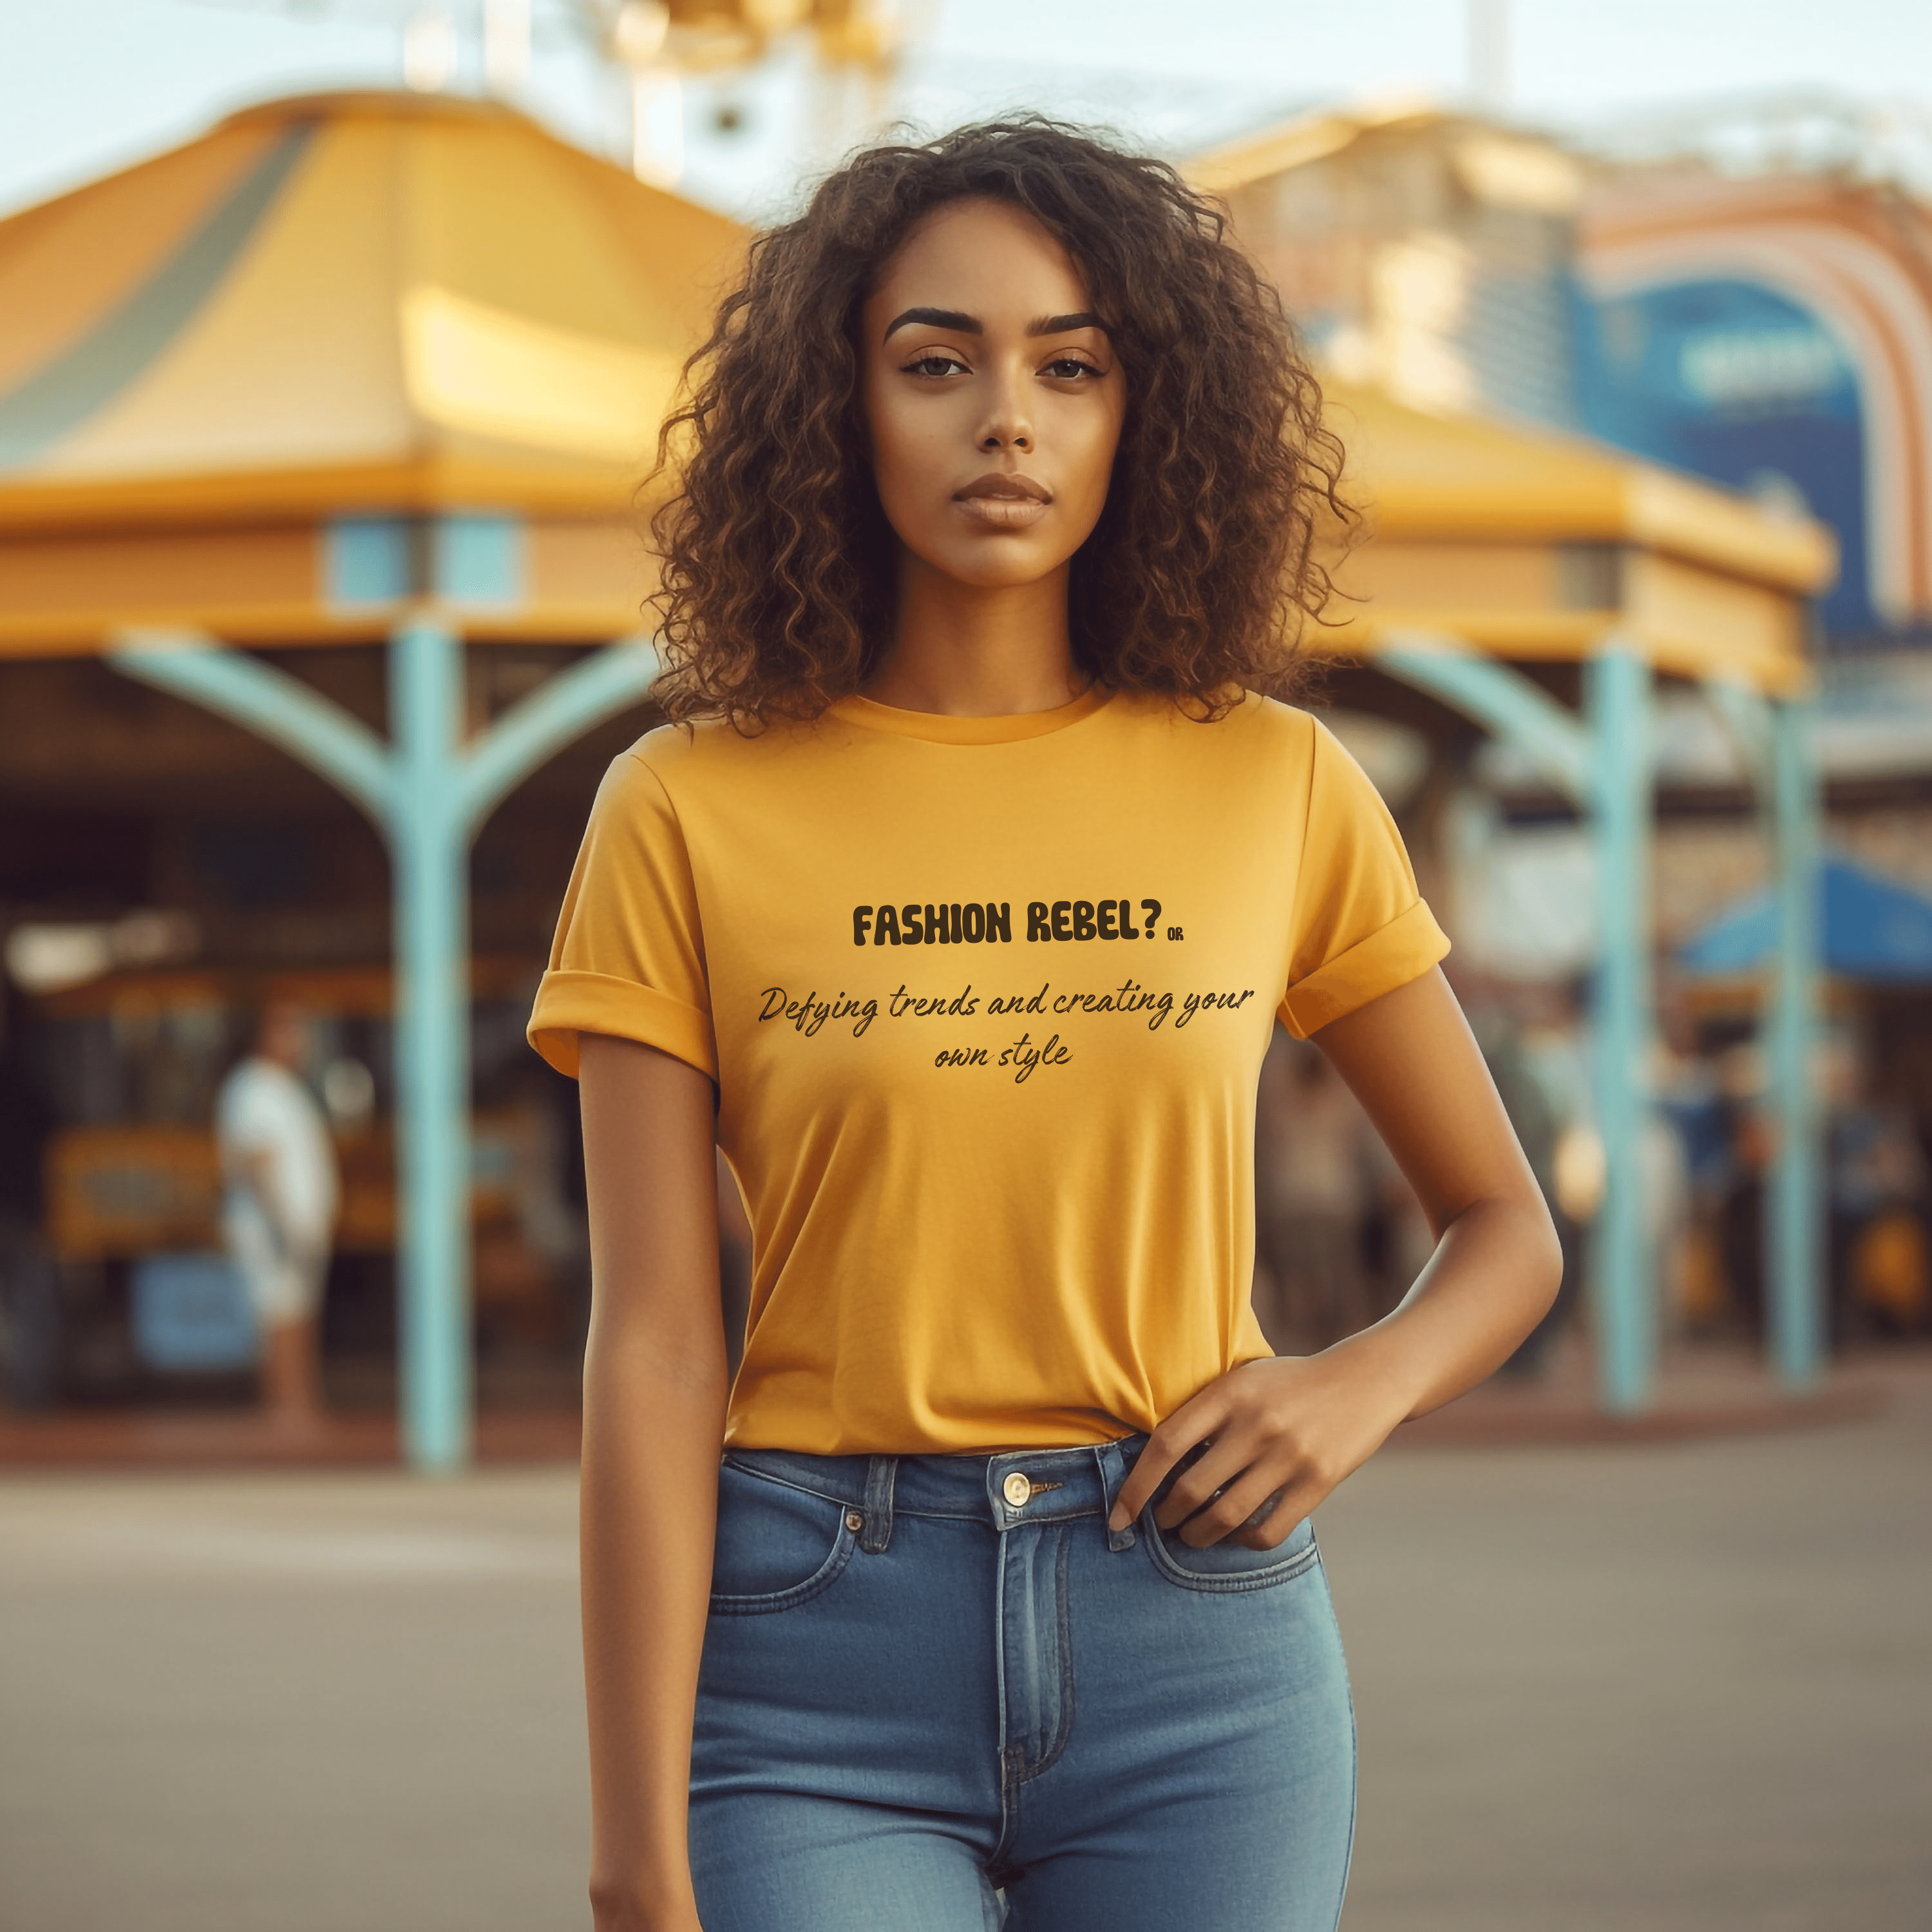 Fashion rebel? or Defying trends and creating your own style T-shirt